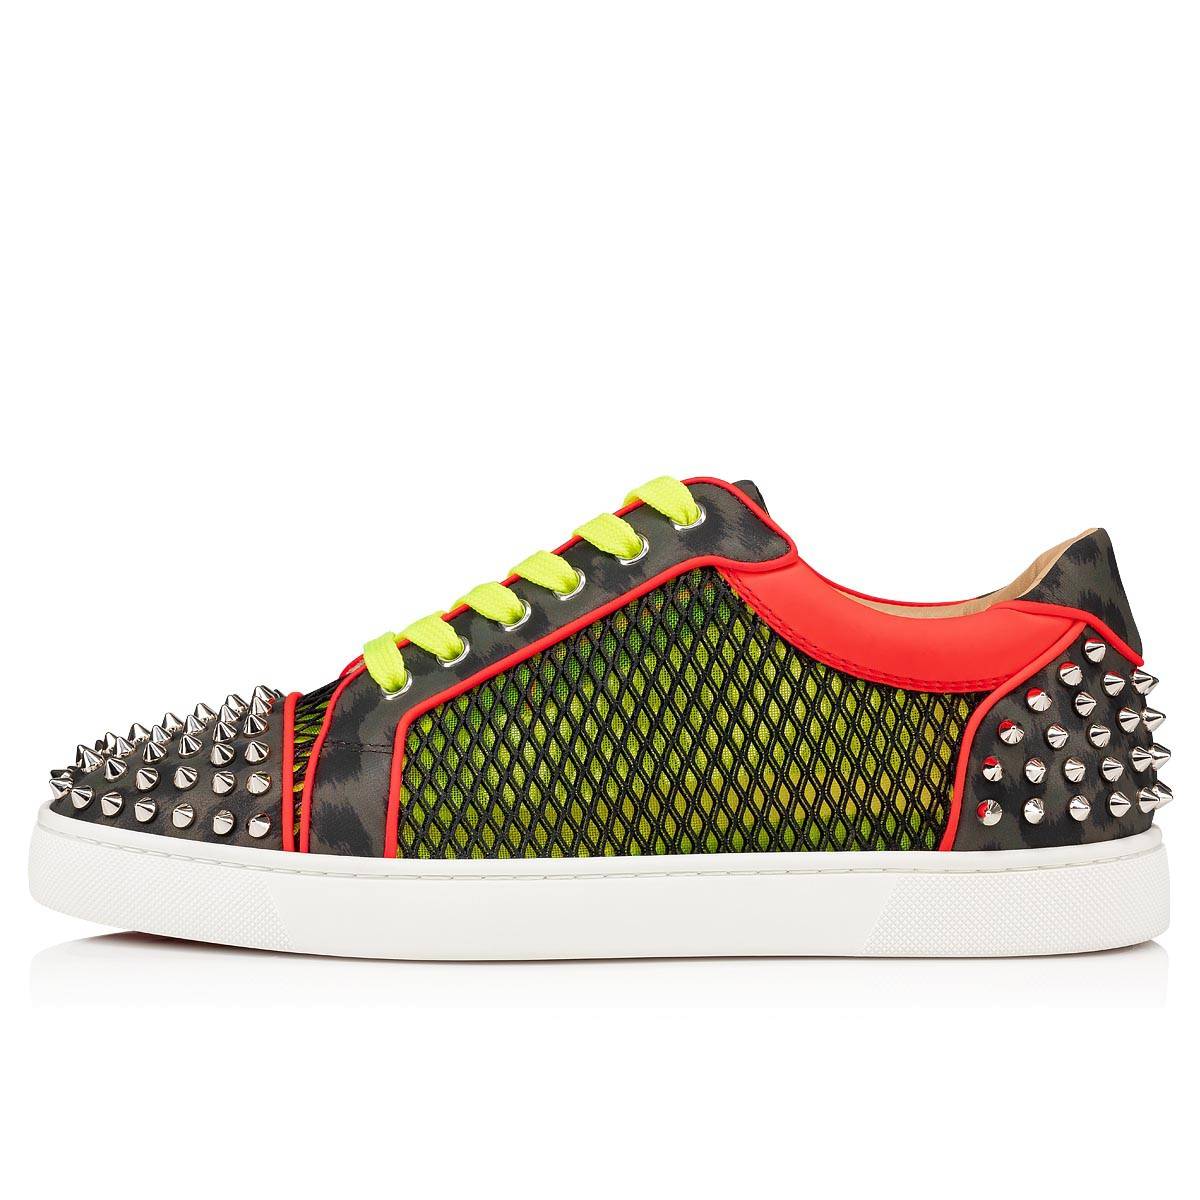 Red Bottoms Low Top Sneakers Australia - Christian Louboutin Ac